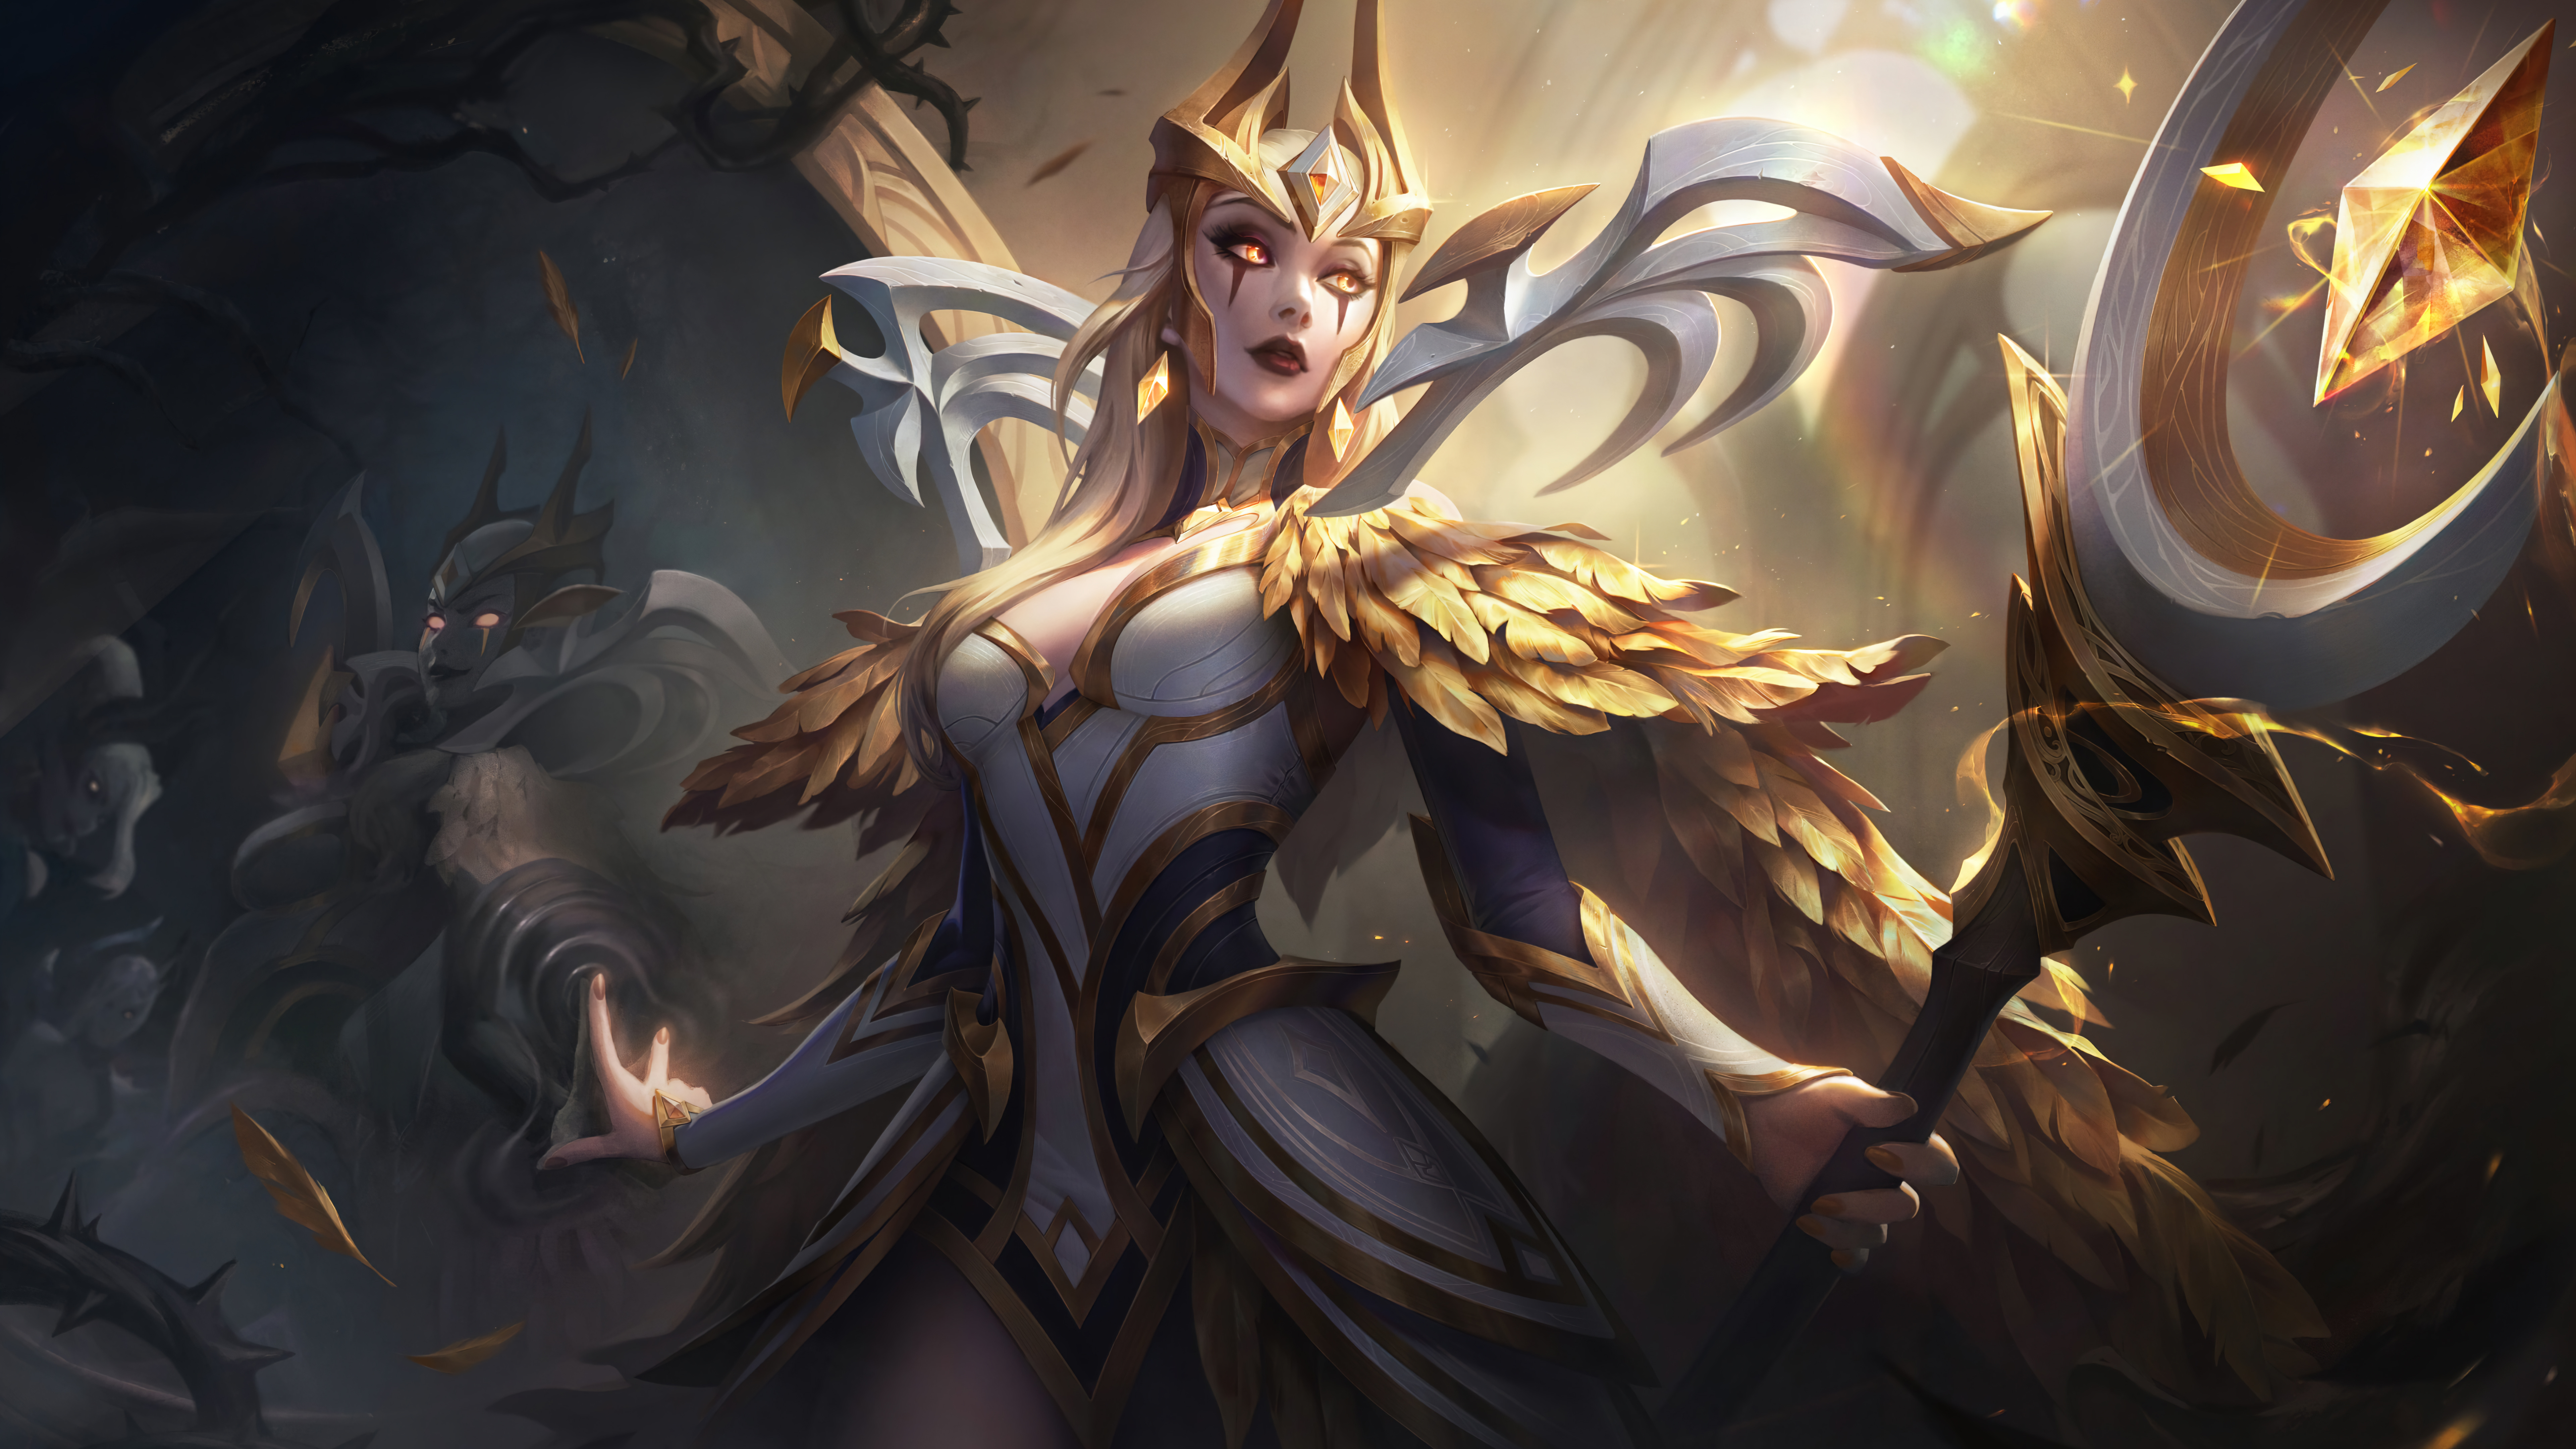 General 7680x4320 LeBlanc (League of Legends) League of Legends Riot Games digital art video game girls video game characters fantasy girl coven (League of Legends) GZG Prestige Edition (League of Legends)